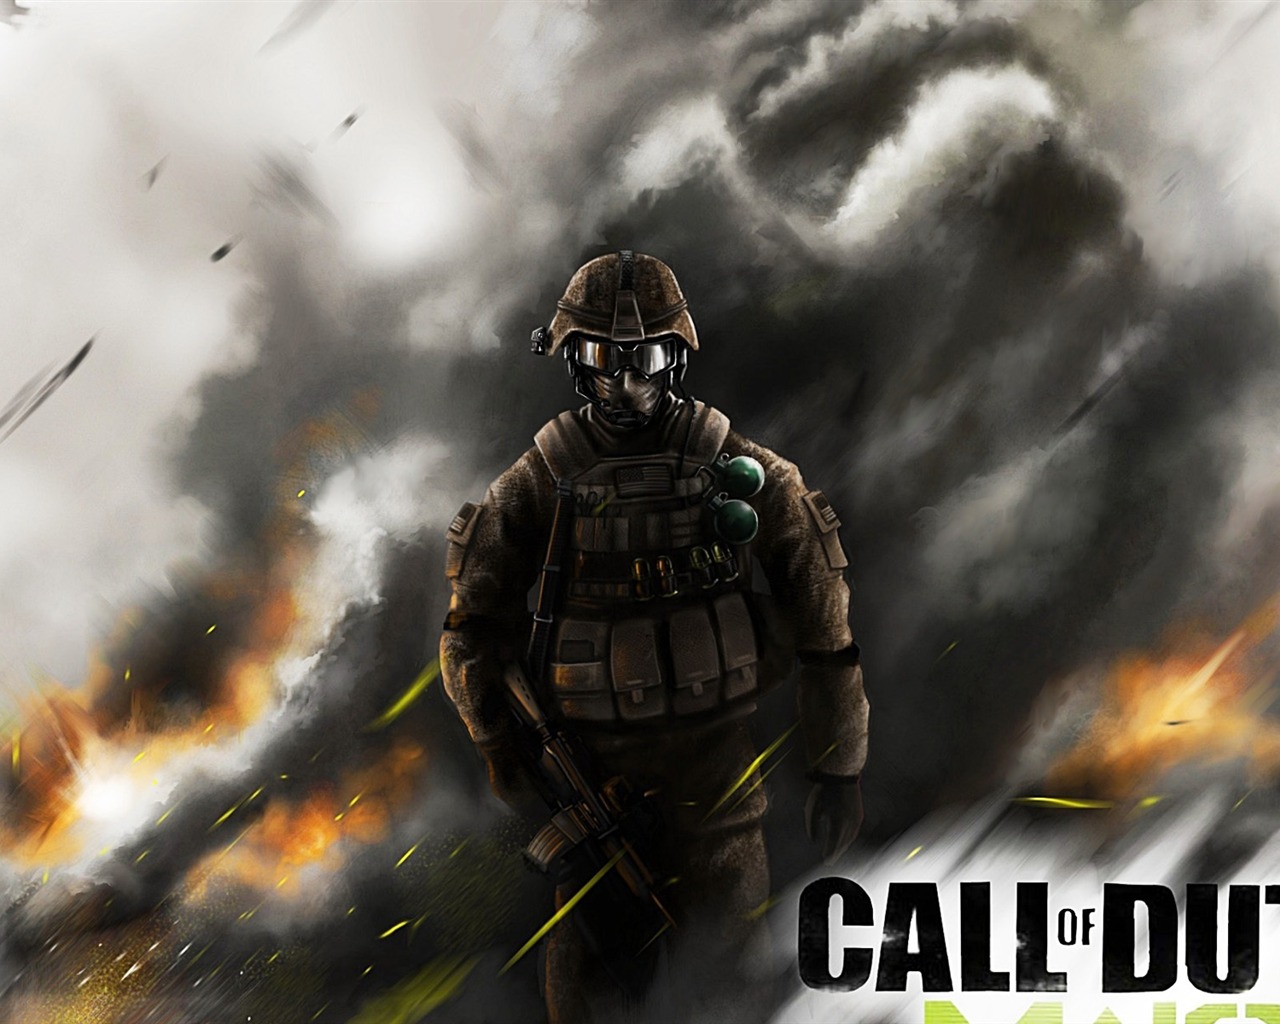 Call of Duty: MW3 HD wallpapers #15 - 1280x1024